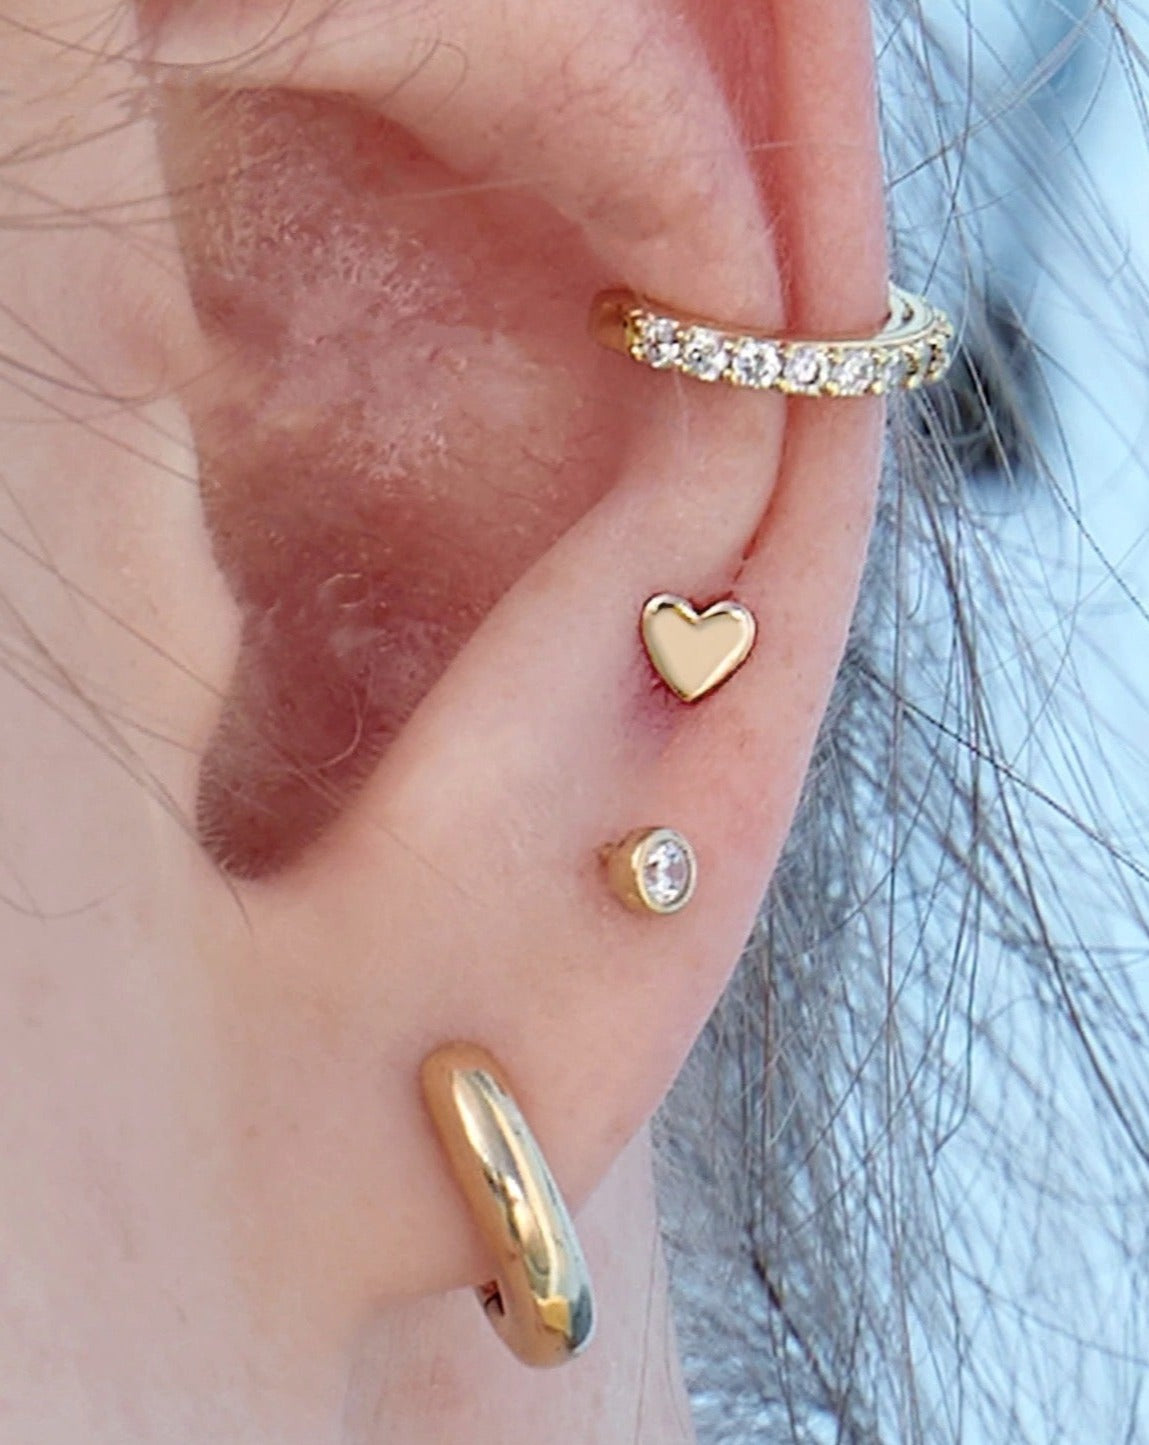 9kt Heart Stud Earring from Collective & Co Jewellery